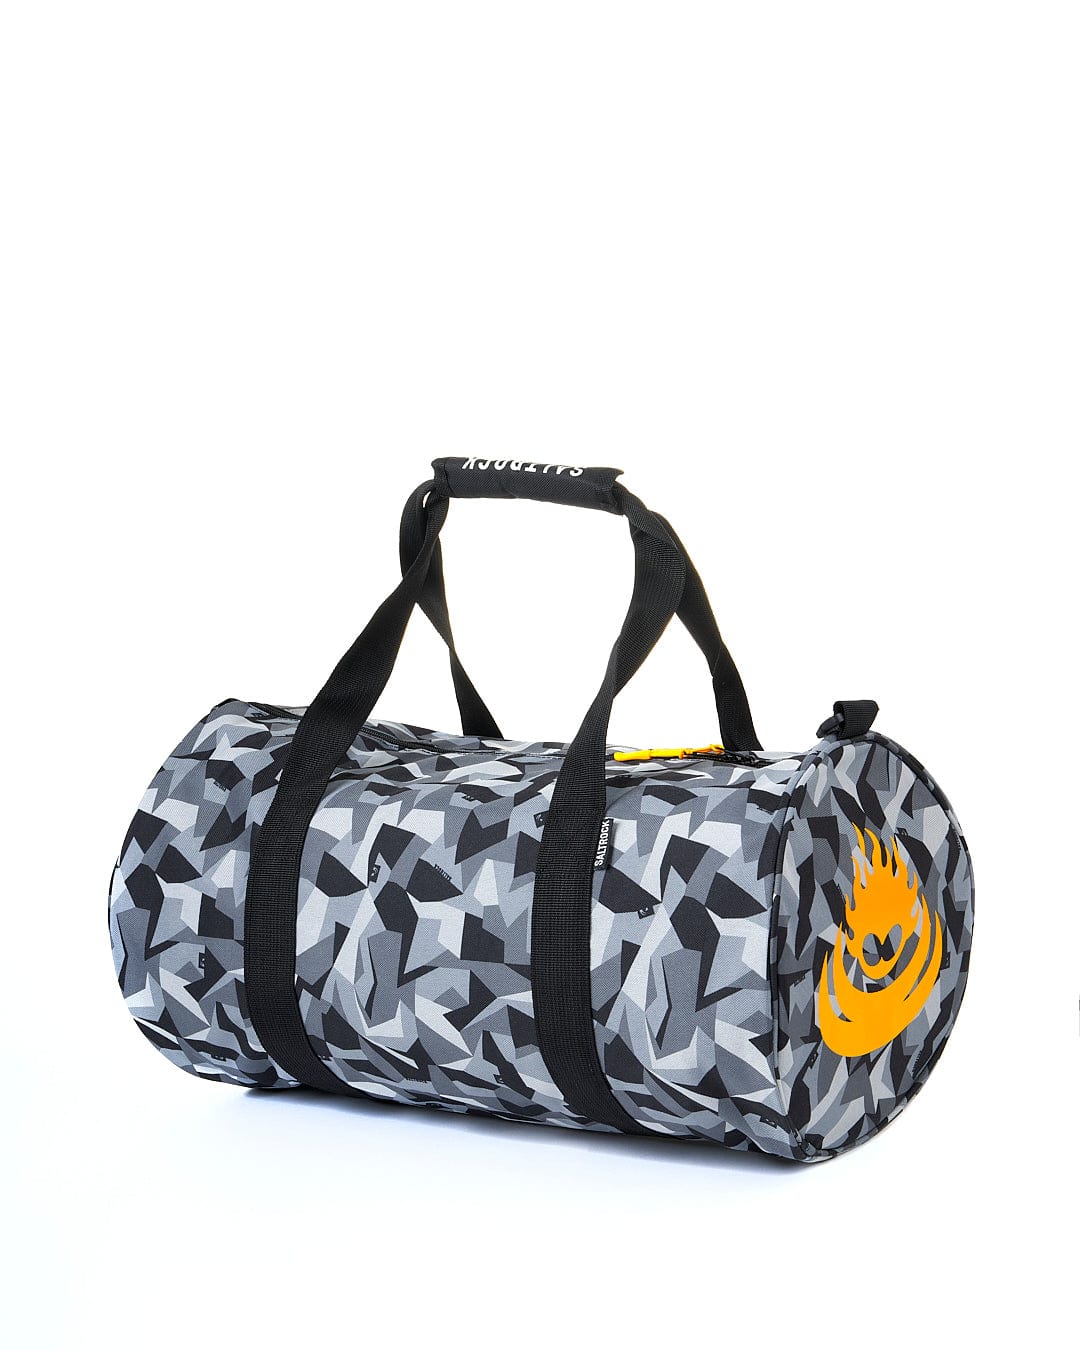 A grey and yellow duffel bag with an orange logo.